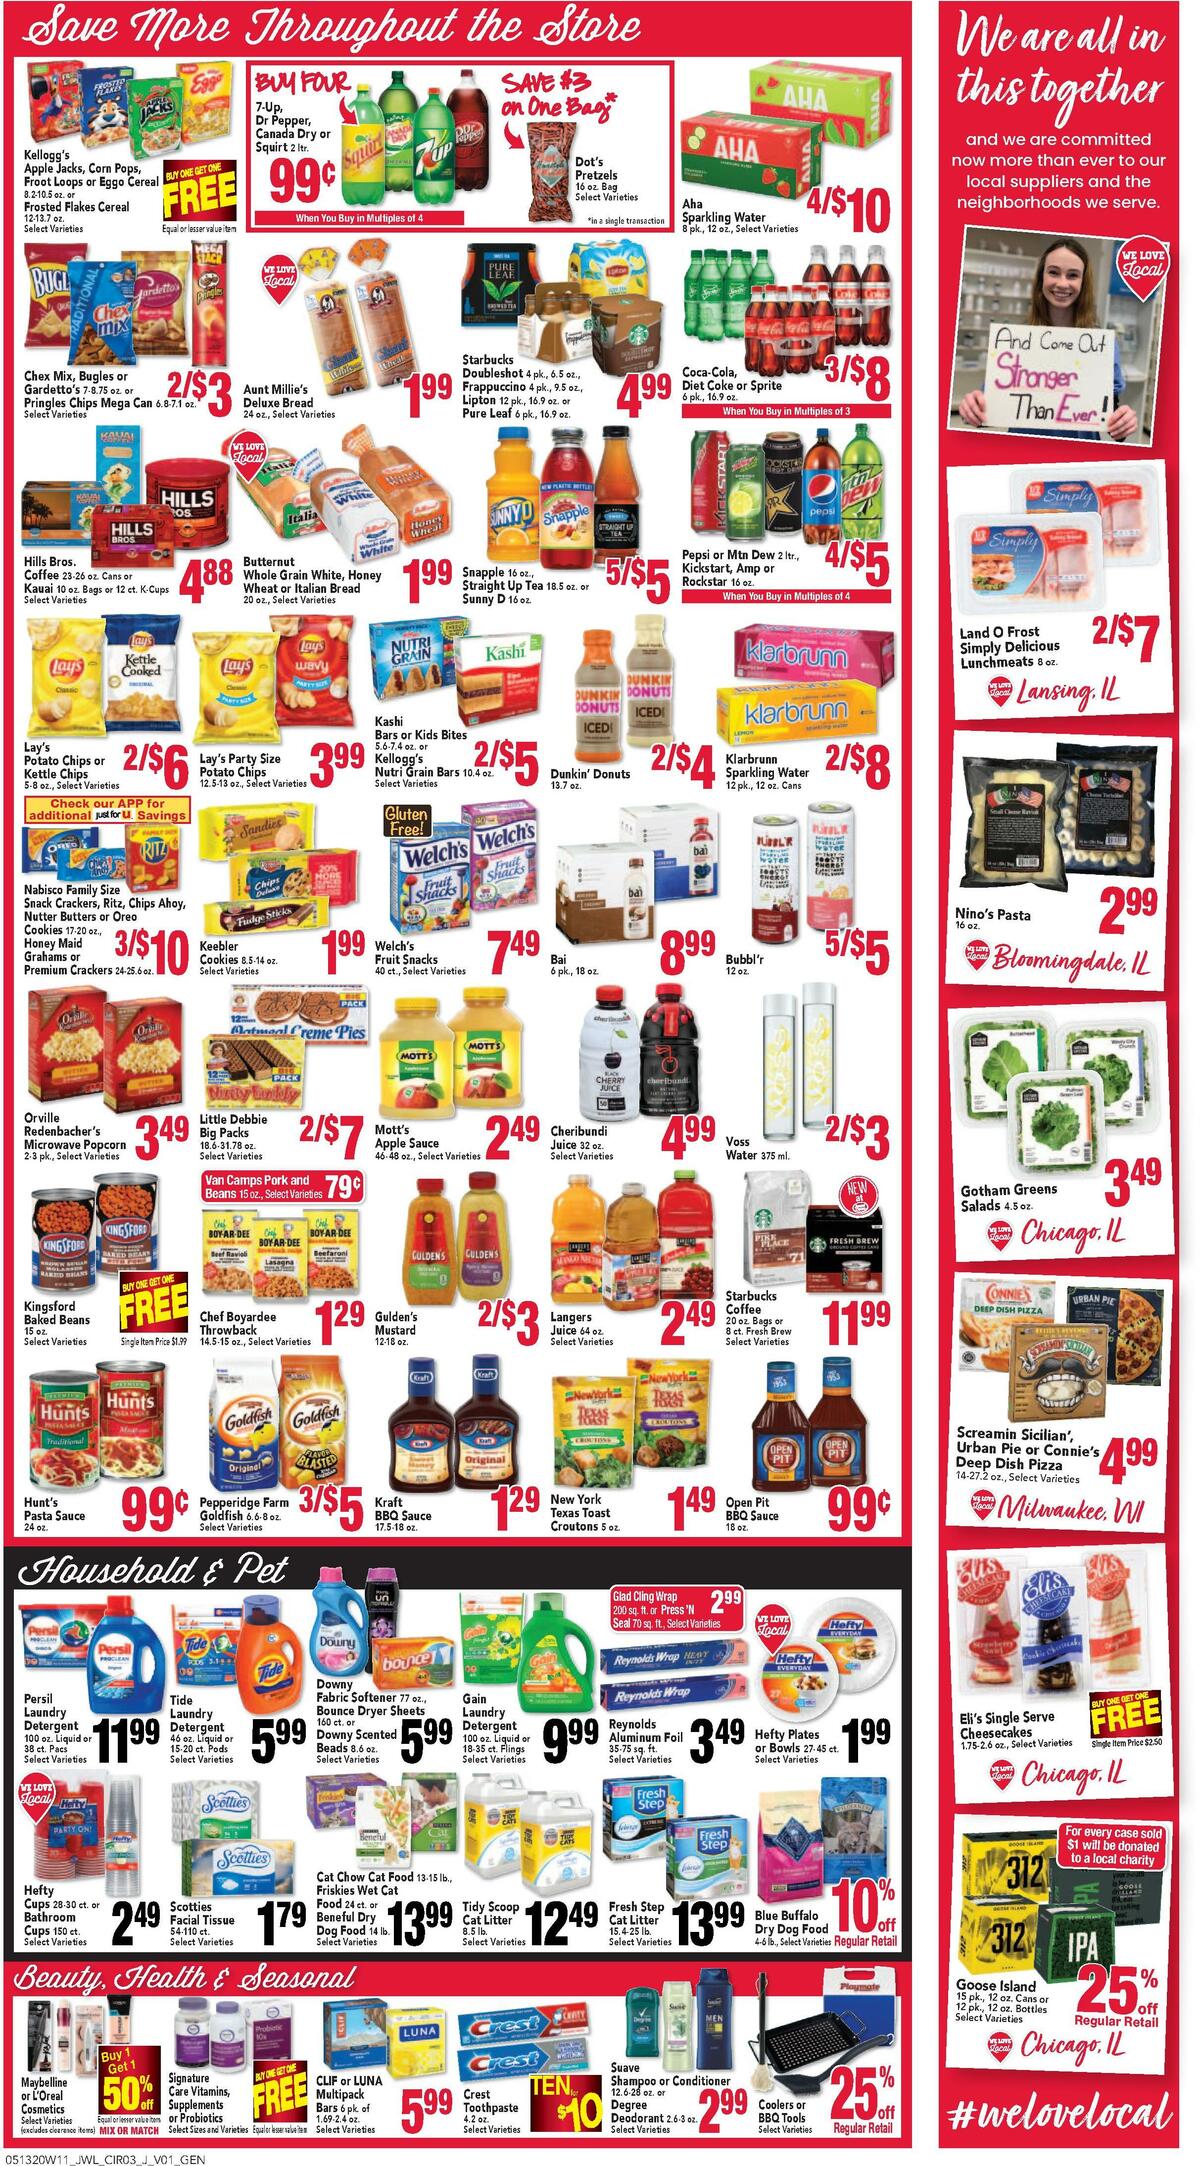 Jewel Osco Weekly Ad from May 13